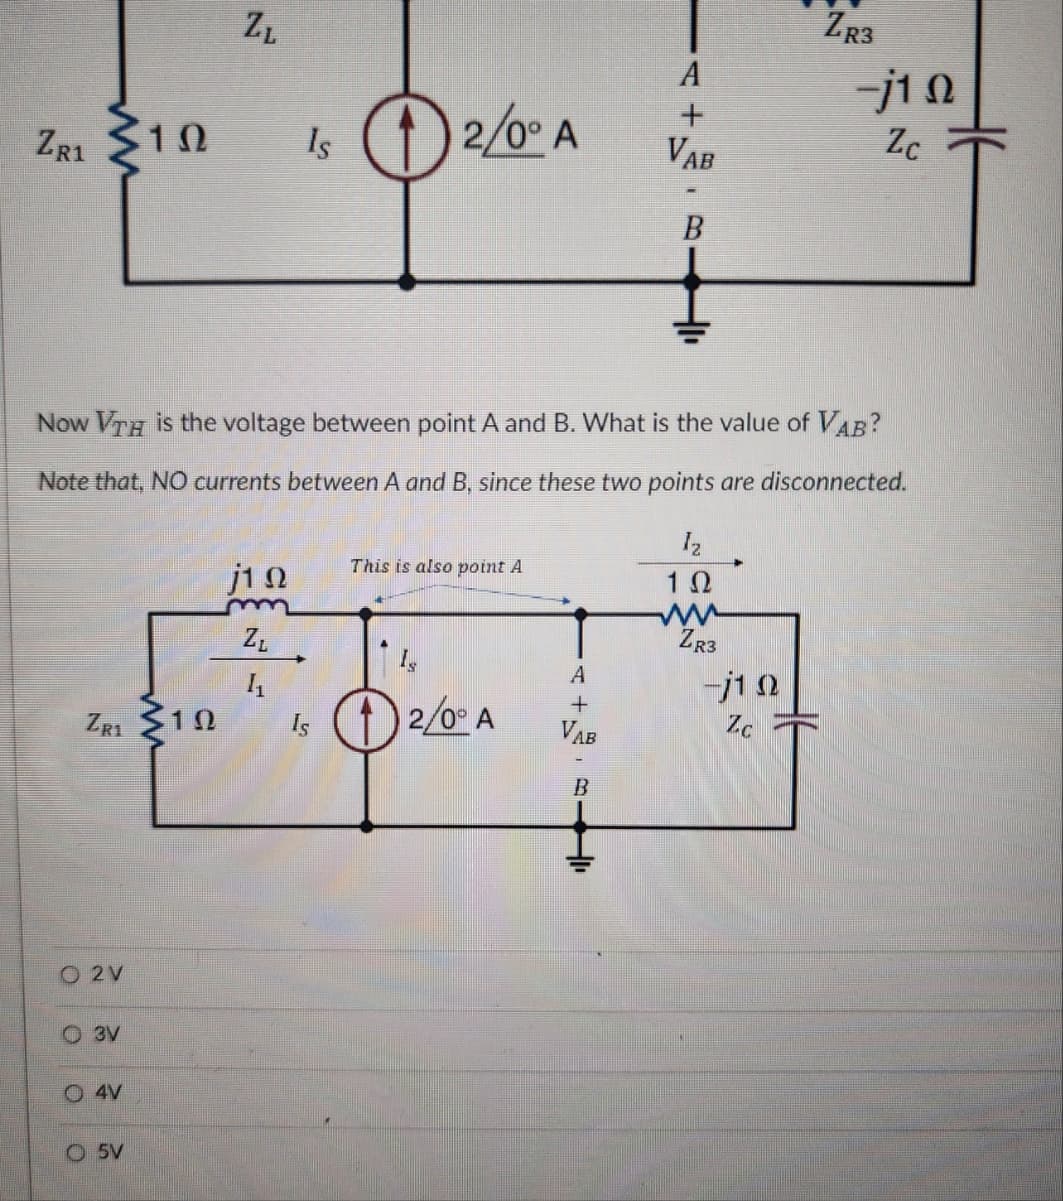 ZL
A
ZRI 10
Is ①2/0° A
+
Vab
B
ZR3
-j10
Zc
Now VTH is the voltage between point A and B. What is the value of VAB?
Note that, NO currents between A and B, since these two points are disconnected.
Iz
This is also point A
j10
1 Ω
m
ZL
ww
ZR3
Is
A
11
-j10
+
ZR1
10
Is
2/0° A
VAB
Zc
B
O 2V
O3V
4V
O5V